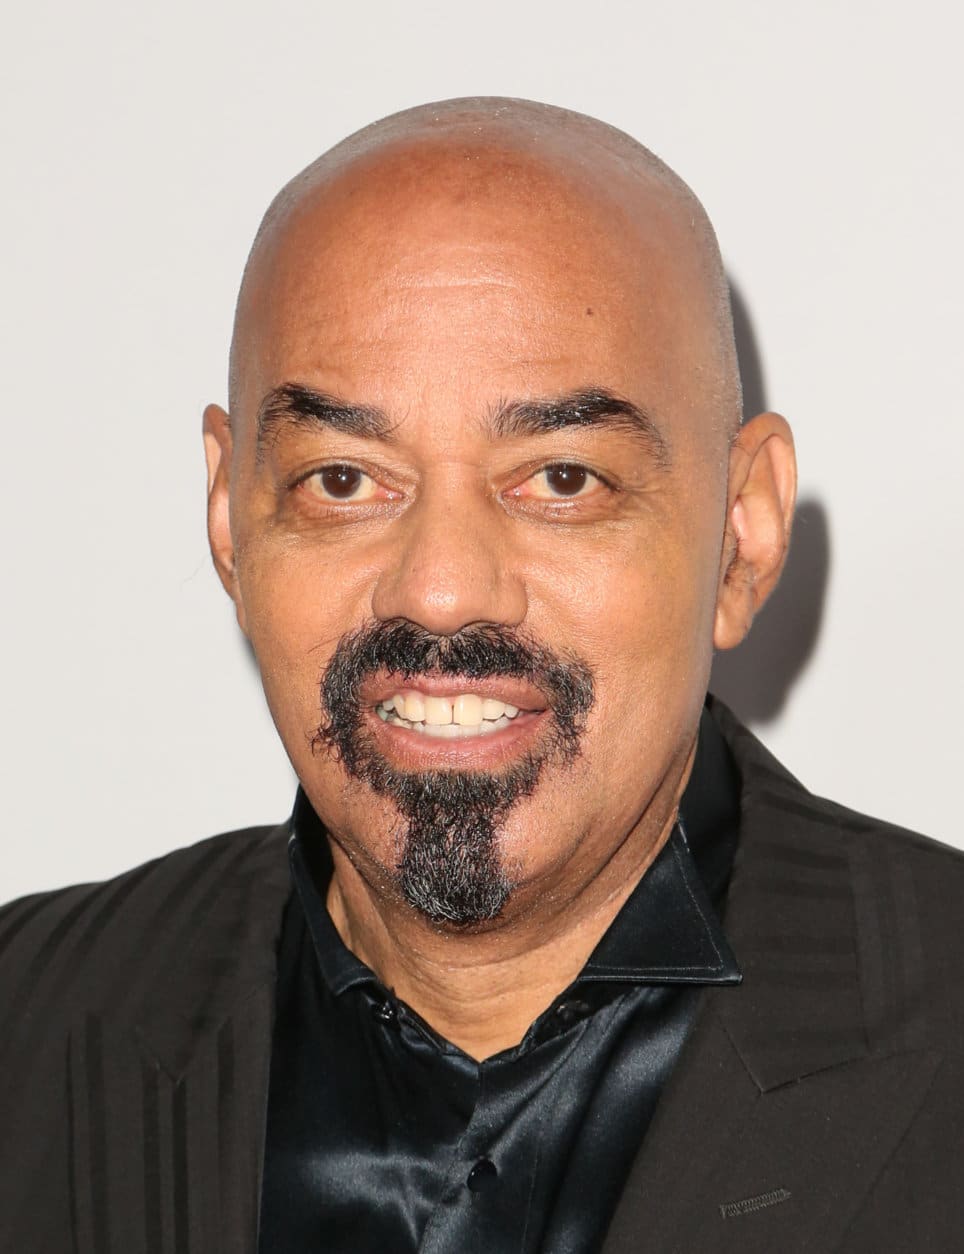 FILE - This Wednesday, Nov. 19, 2014 file photo shows James Ingram at the 2014 Ebony Power 100 Gala at The Avalon Hollywood in Los Angeles. (Photo by Brian Dowling/Invision/AP, File)